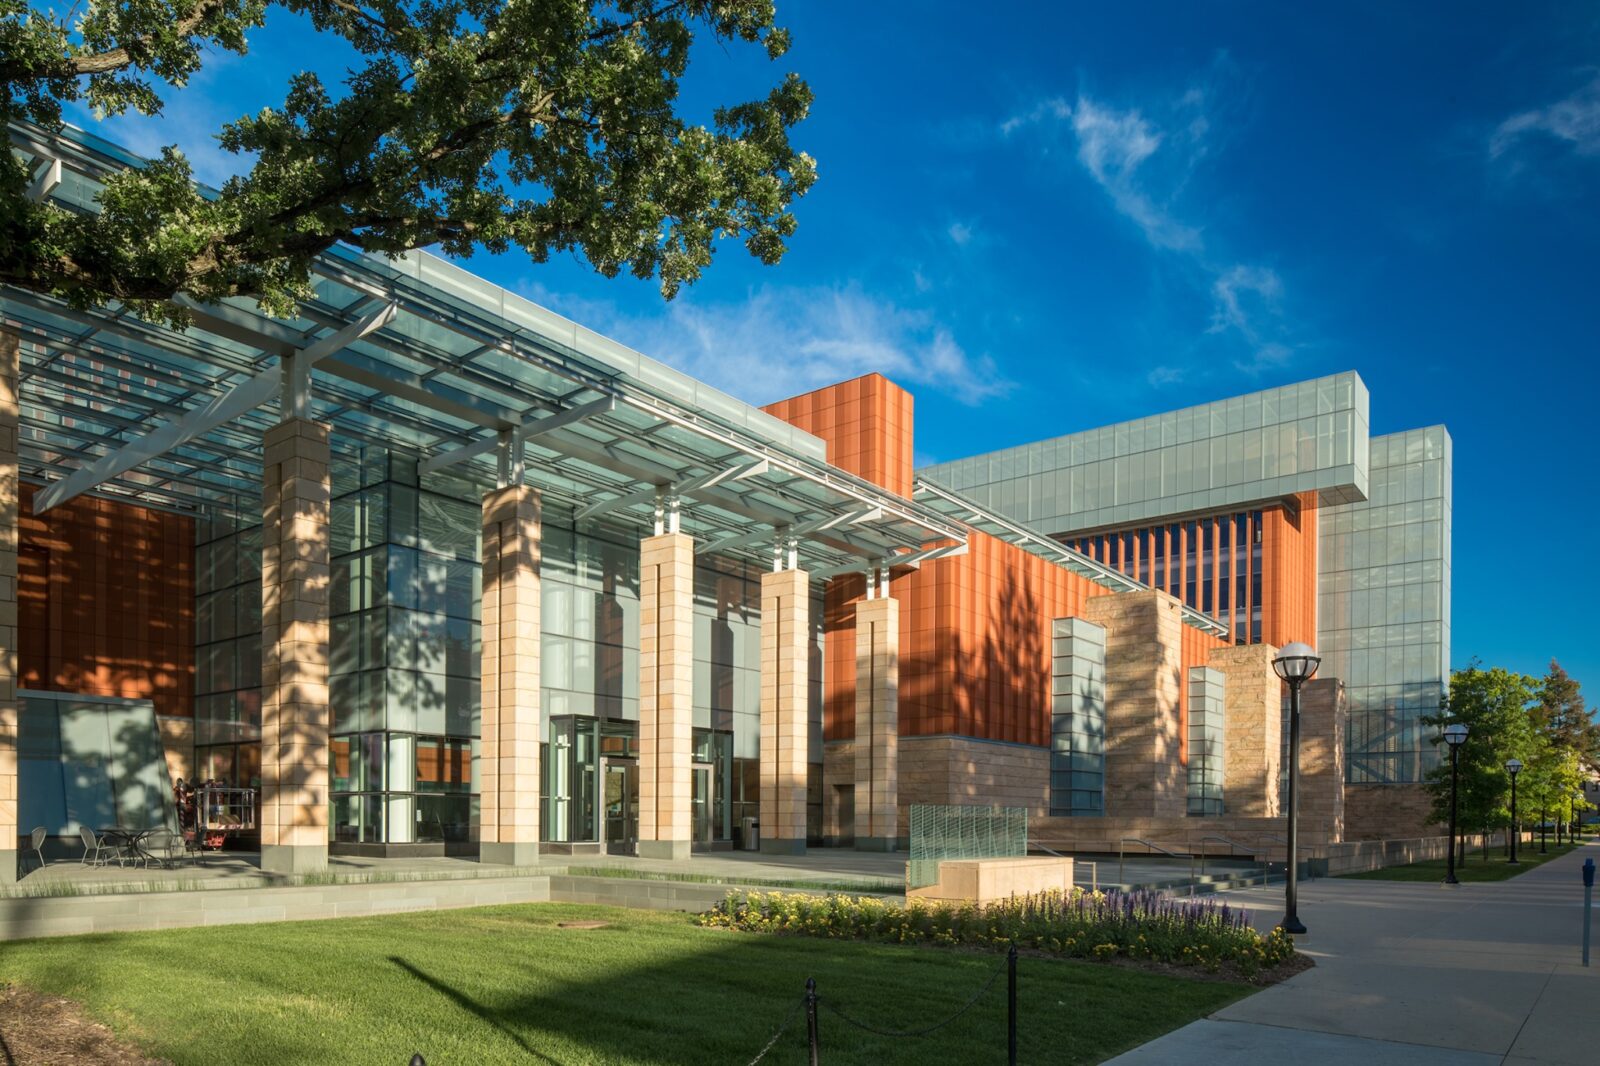 Michigan Ross's new modern building on campus